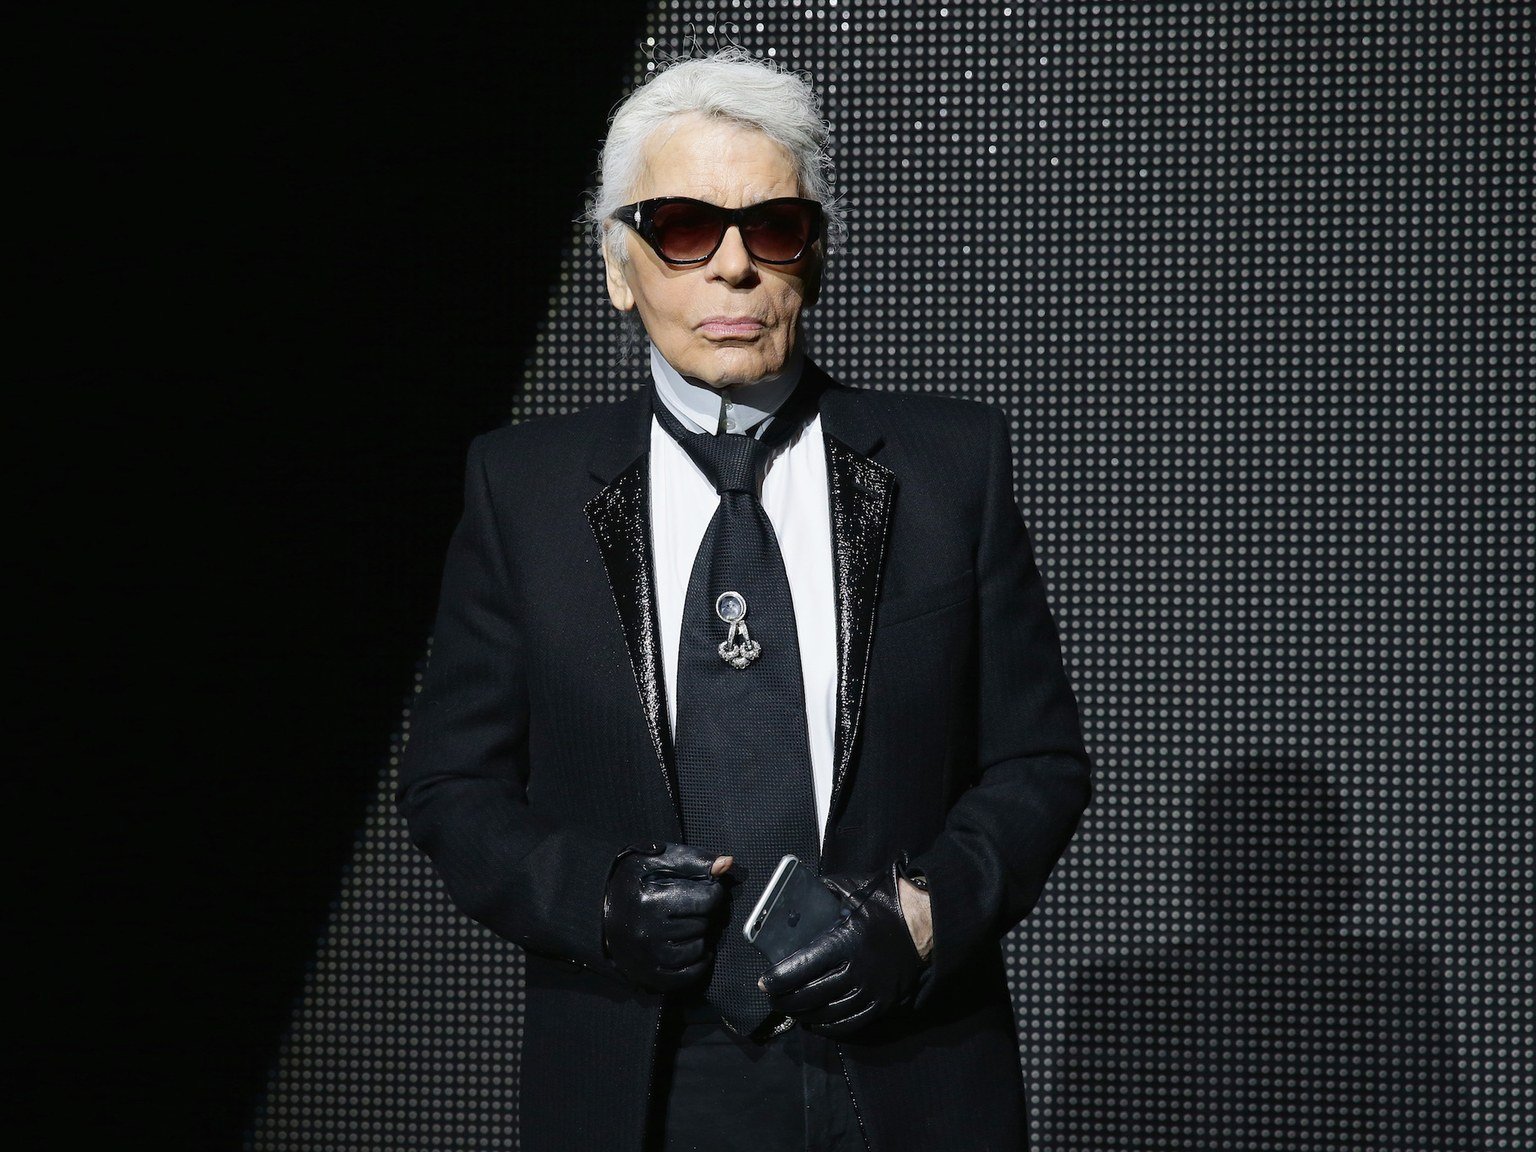 As Karl Lagerfeld Passed Away at 85, Look Back at His Most Memorable Designs and Styles - unique designs, styles, oddities, memories, Karl Lagerfeld, death on February 19, 2019